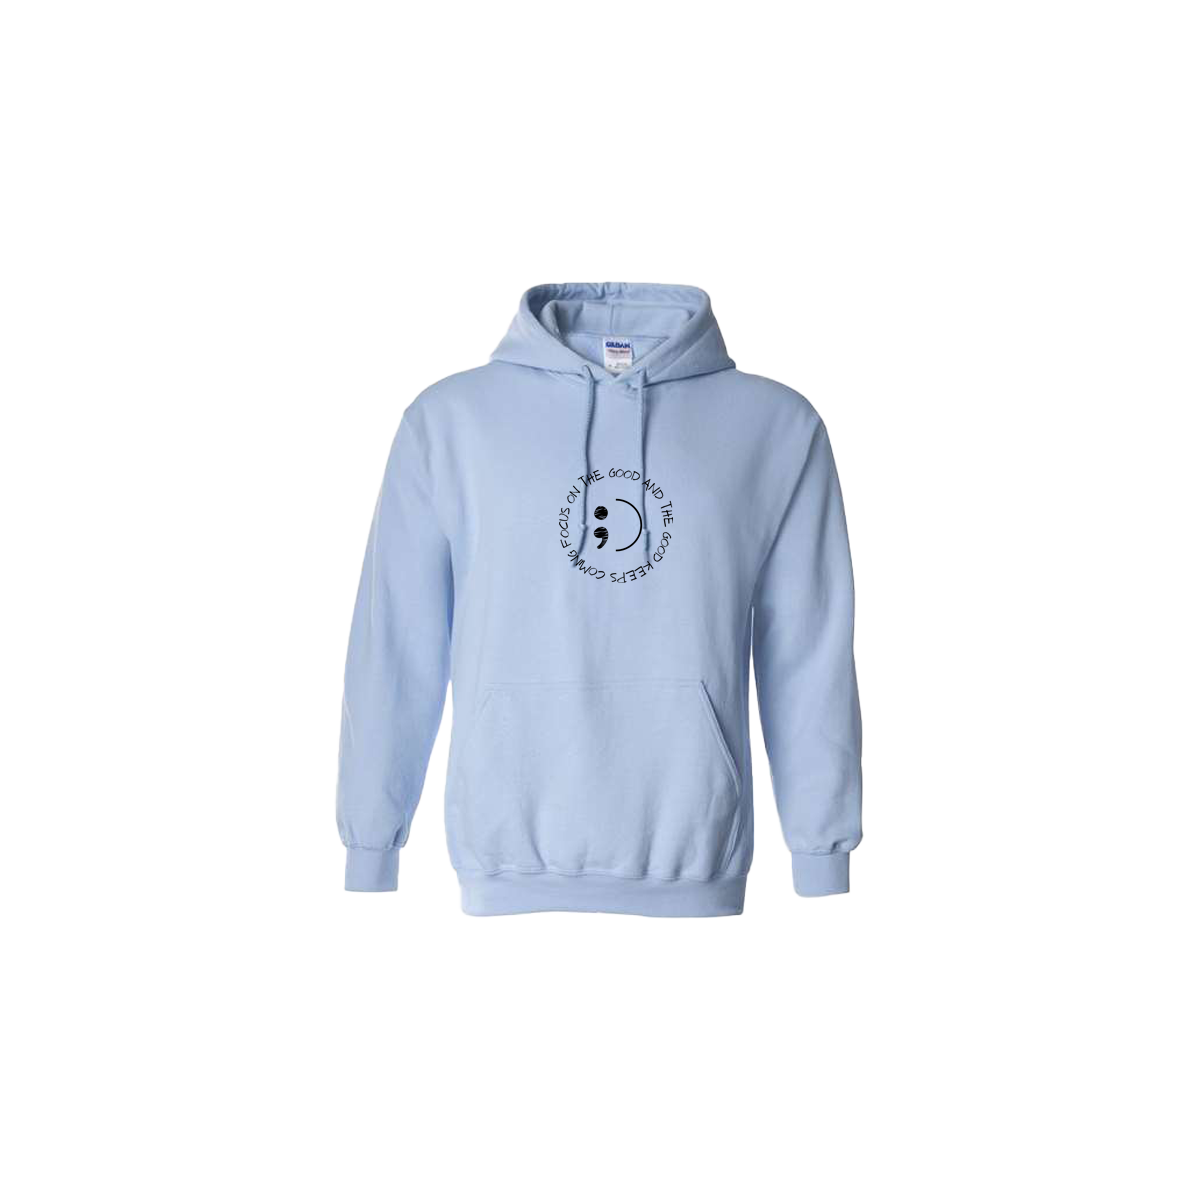 Focus on The Good And The Good Keeps Coming Embroidered Light Blue Hoodie - Mental Health Awareness Clothing